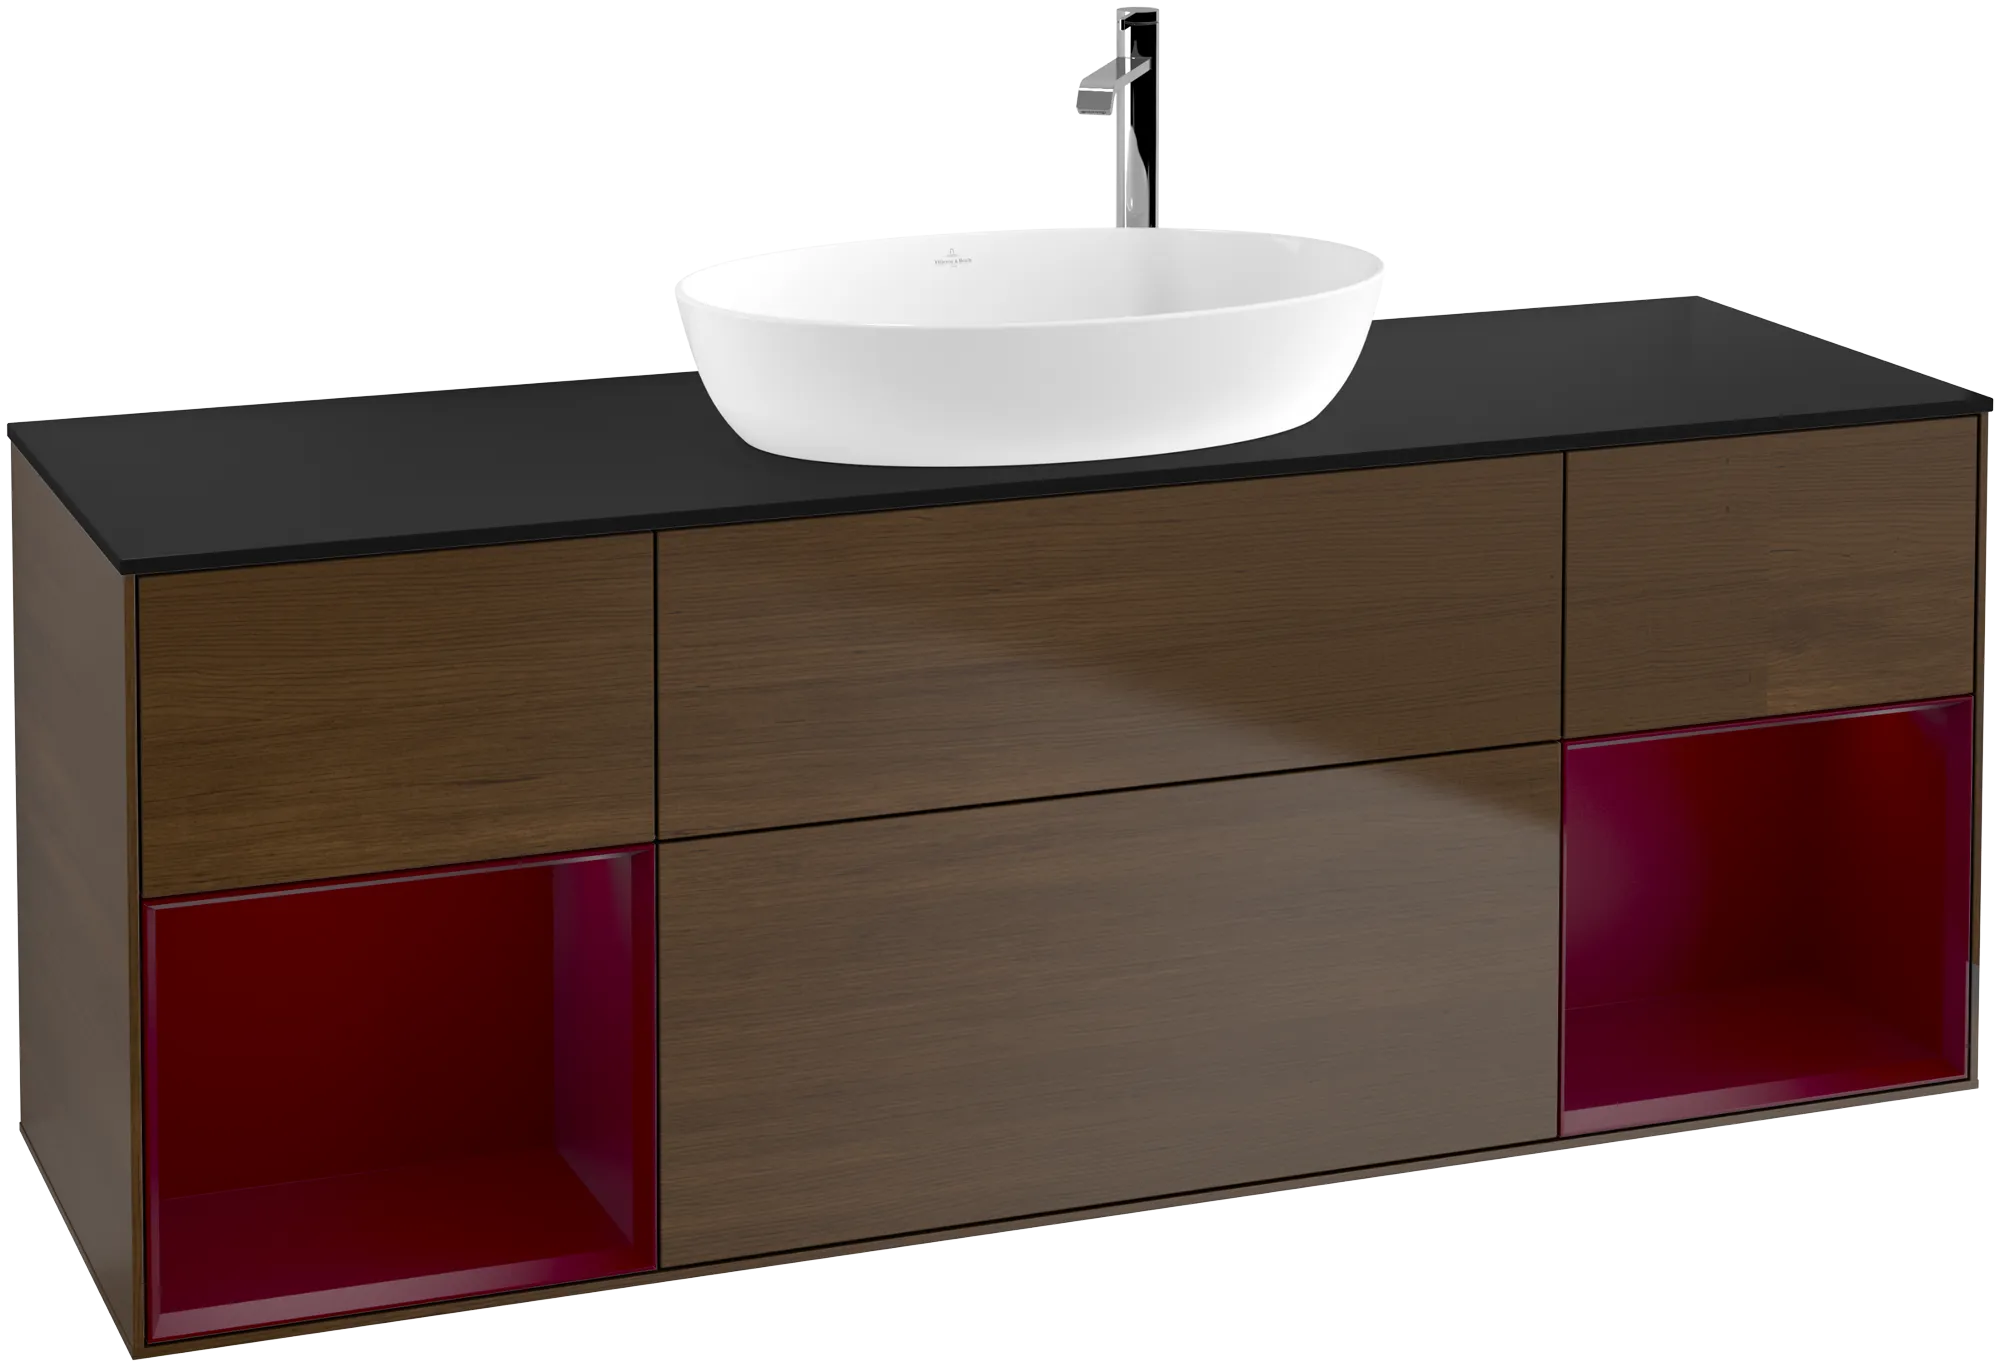 Picture of VILLEROY BOCH Finion Vanity unit, with lighting, 4 pull-out compartments, 1600 x 603 x 501 mm, Walnut Veneer / Peony Matt Lacquer / Glass Black Matt #G982HBGN